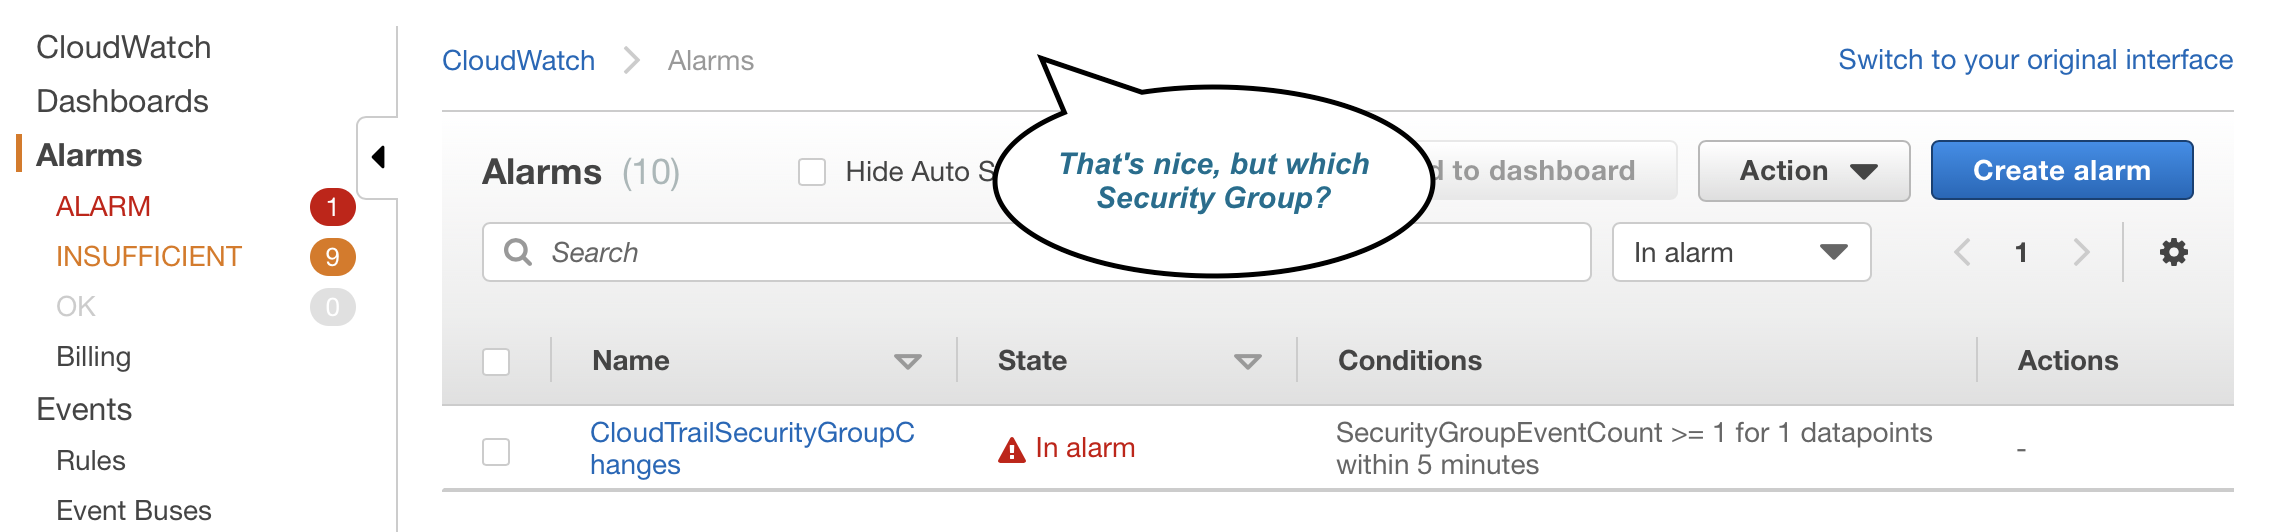 CloudWatch Alarm in the AWS Console